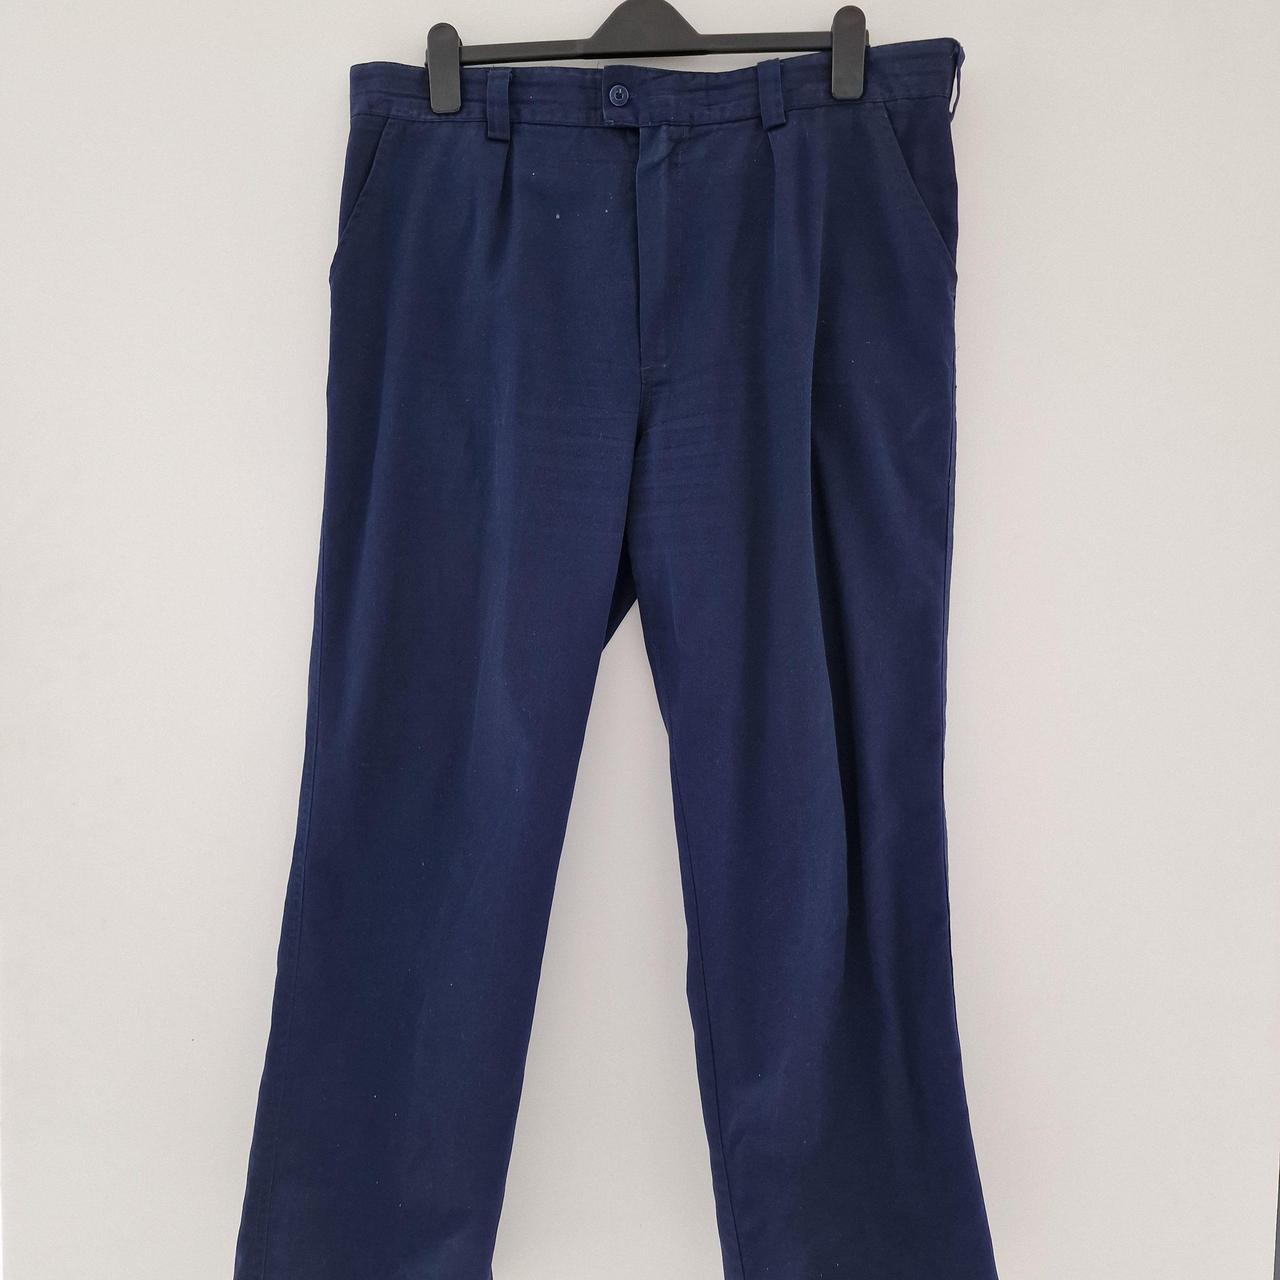 Dickies Chino Trousers 40R Navy Cotton Blend... - Depop